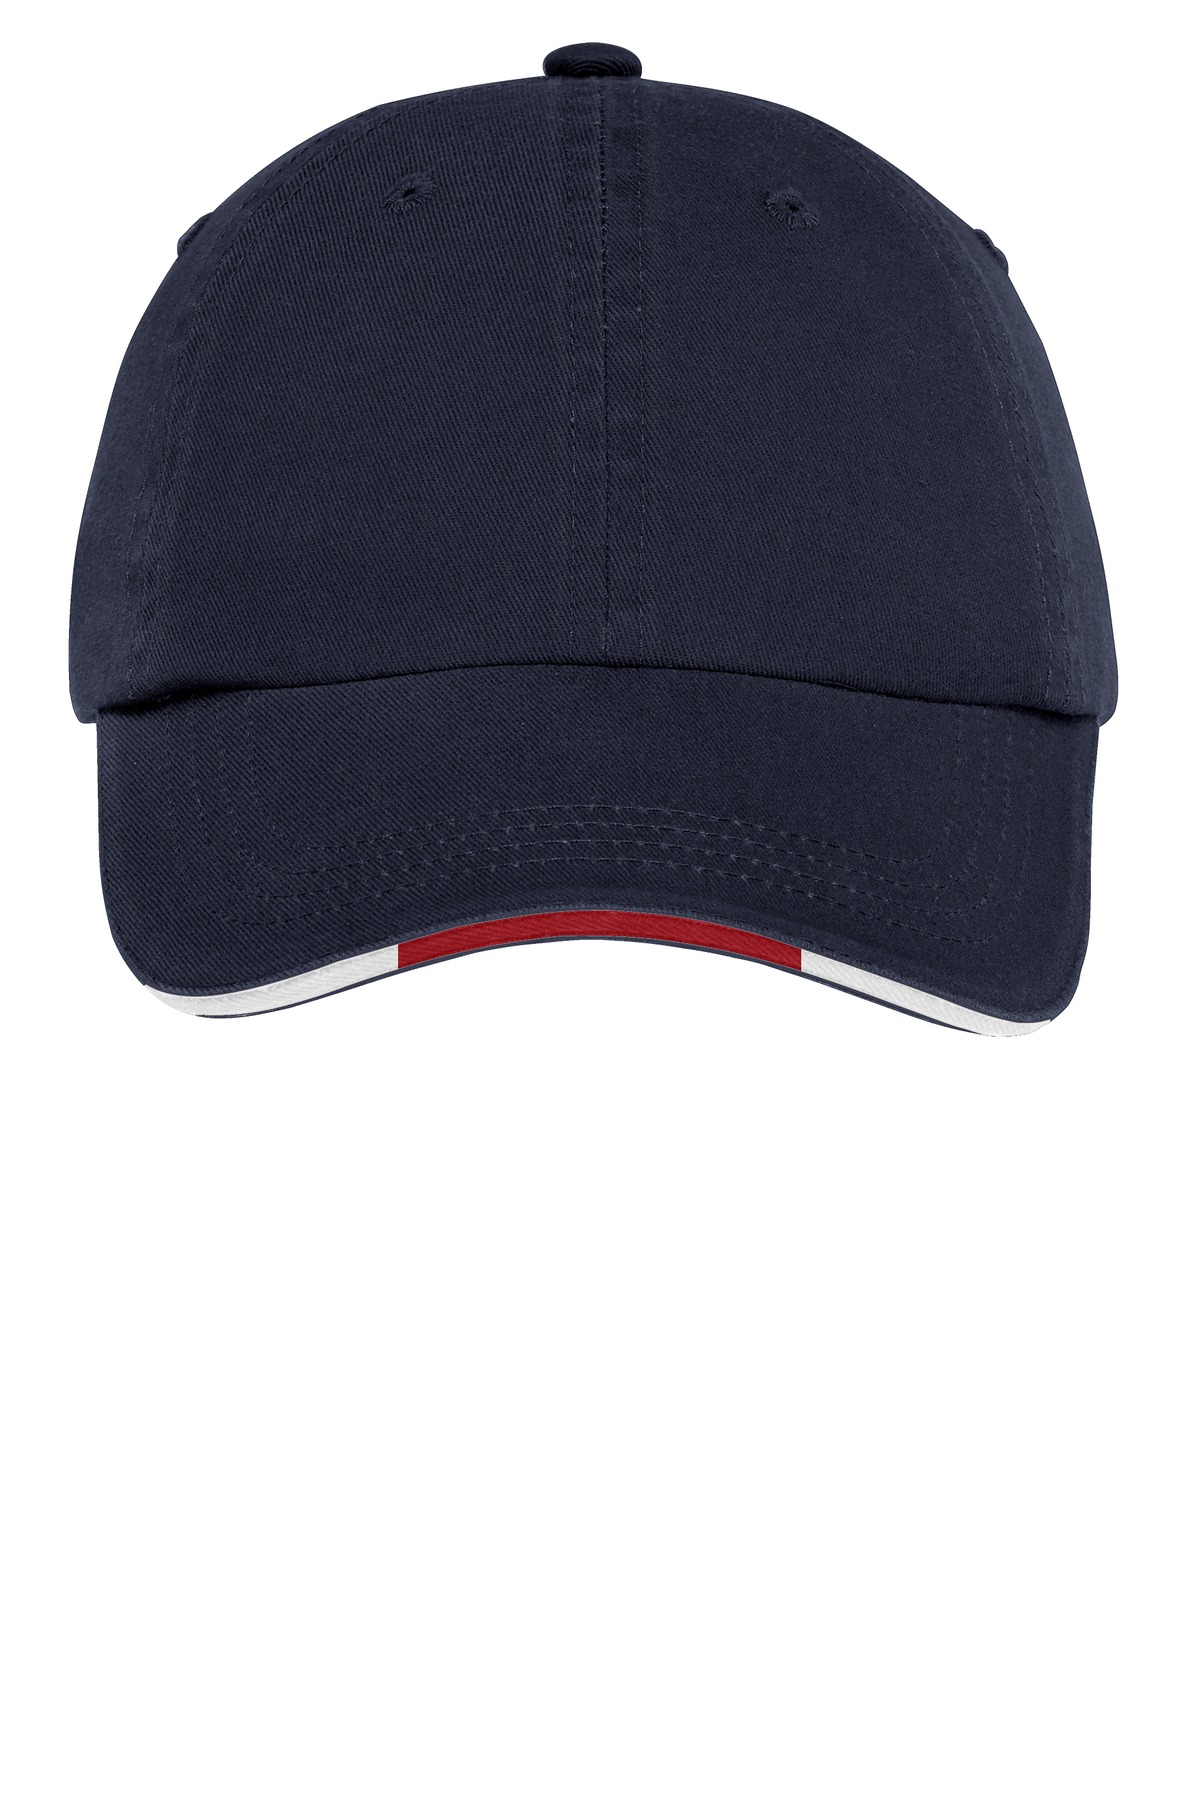 Classic Navy/ Red/ White